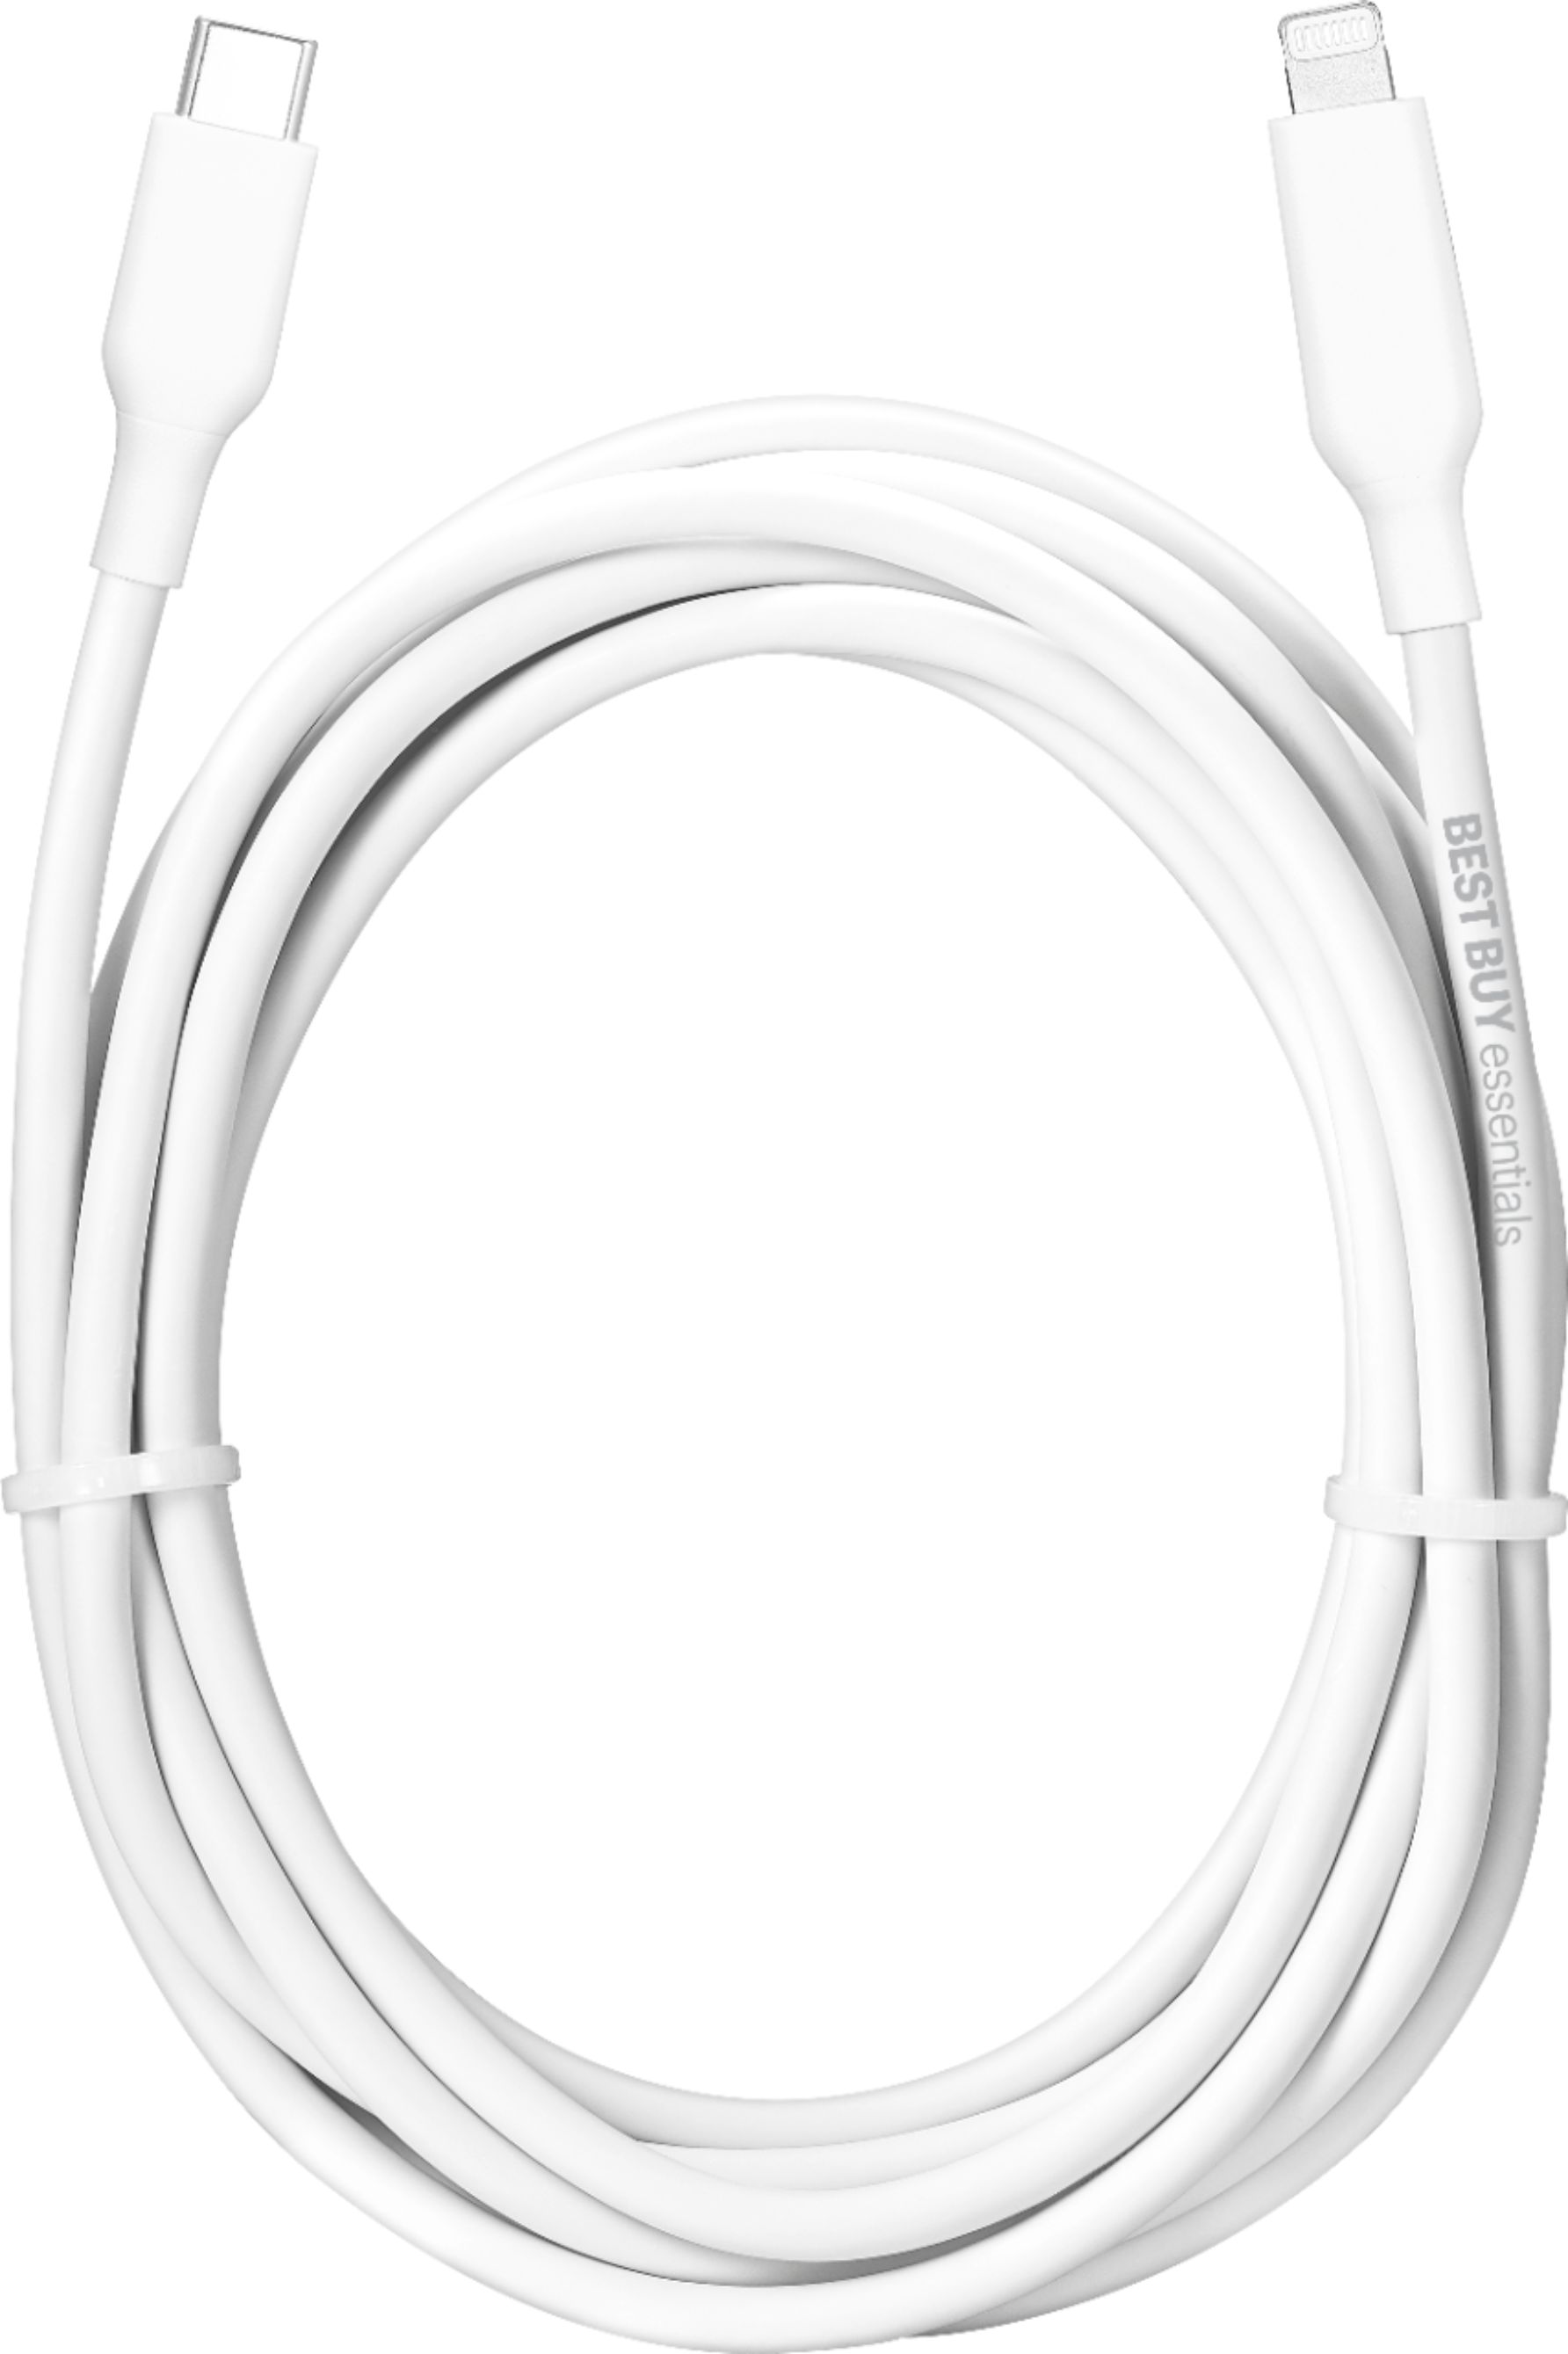 Mount Bank tiggeri marmelade Best Buy essentials™ 9' Lightning to USB-C Charge-and-Sync Cable White  BE-MLC922W - Best Buy